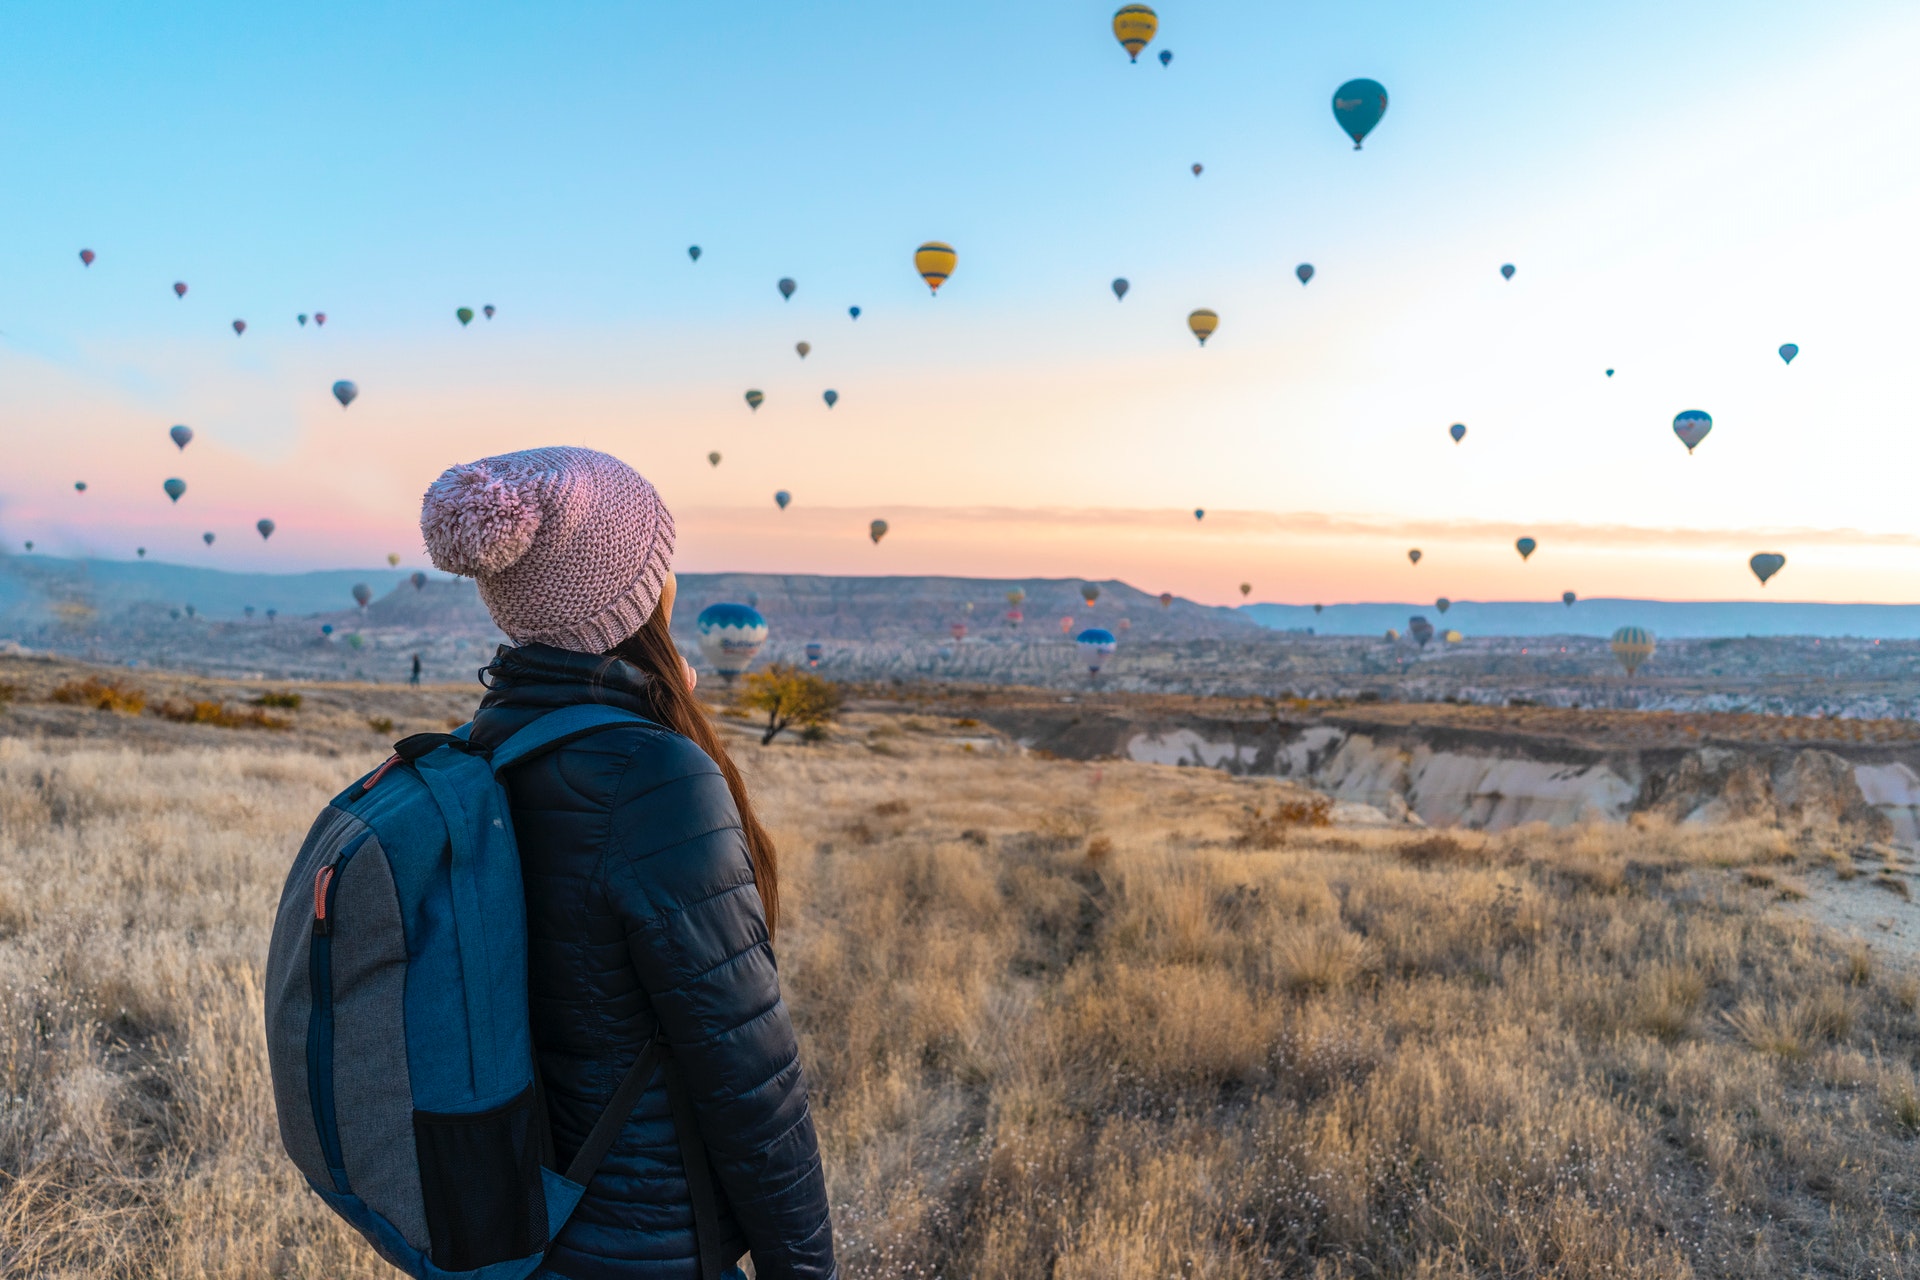 Woman watching hot air balloons rise into the air